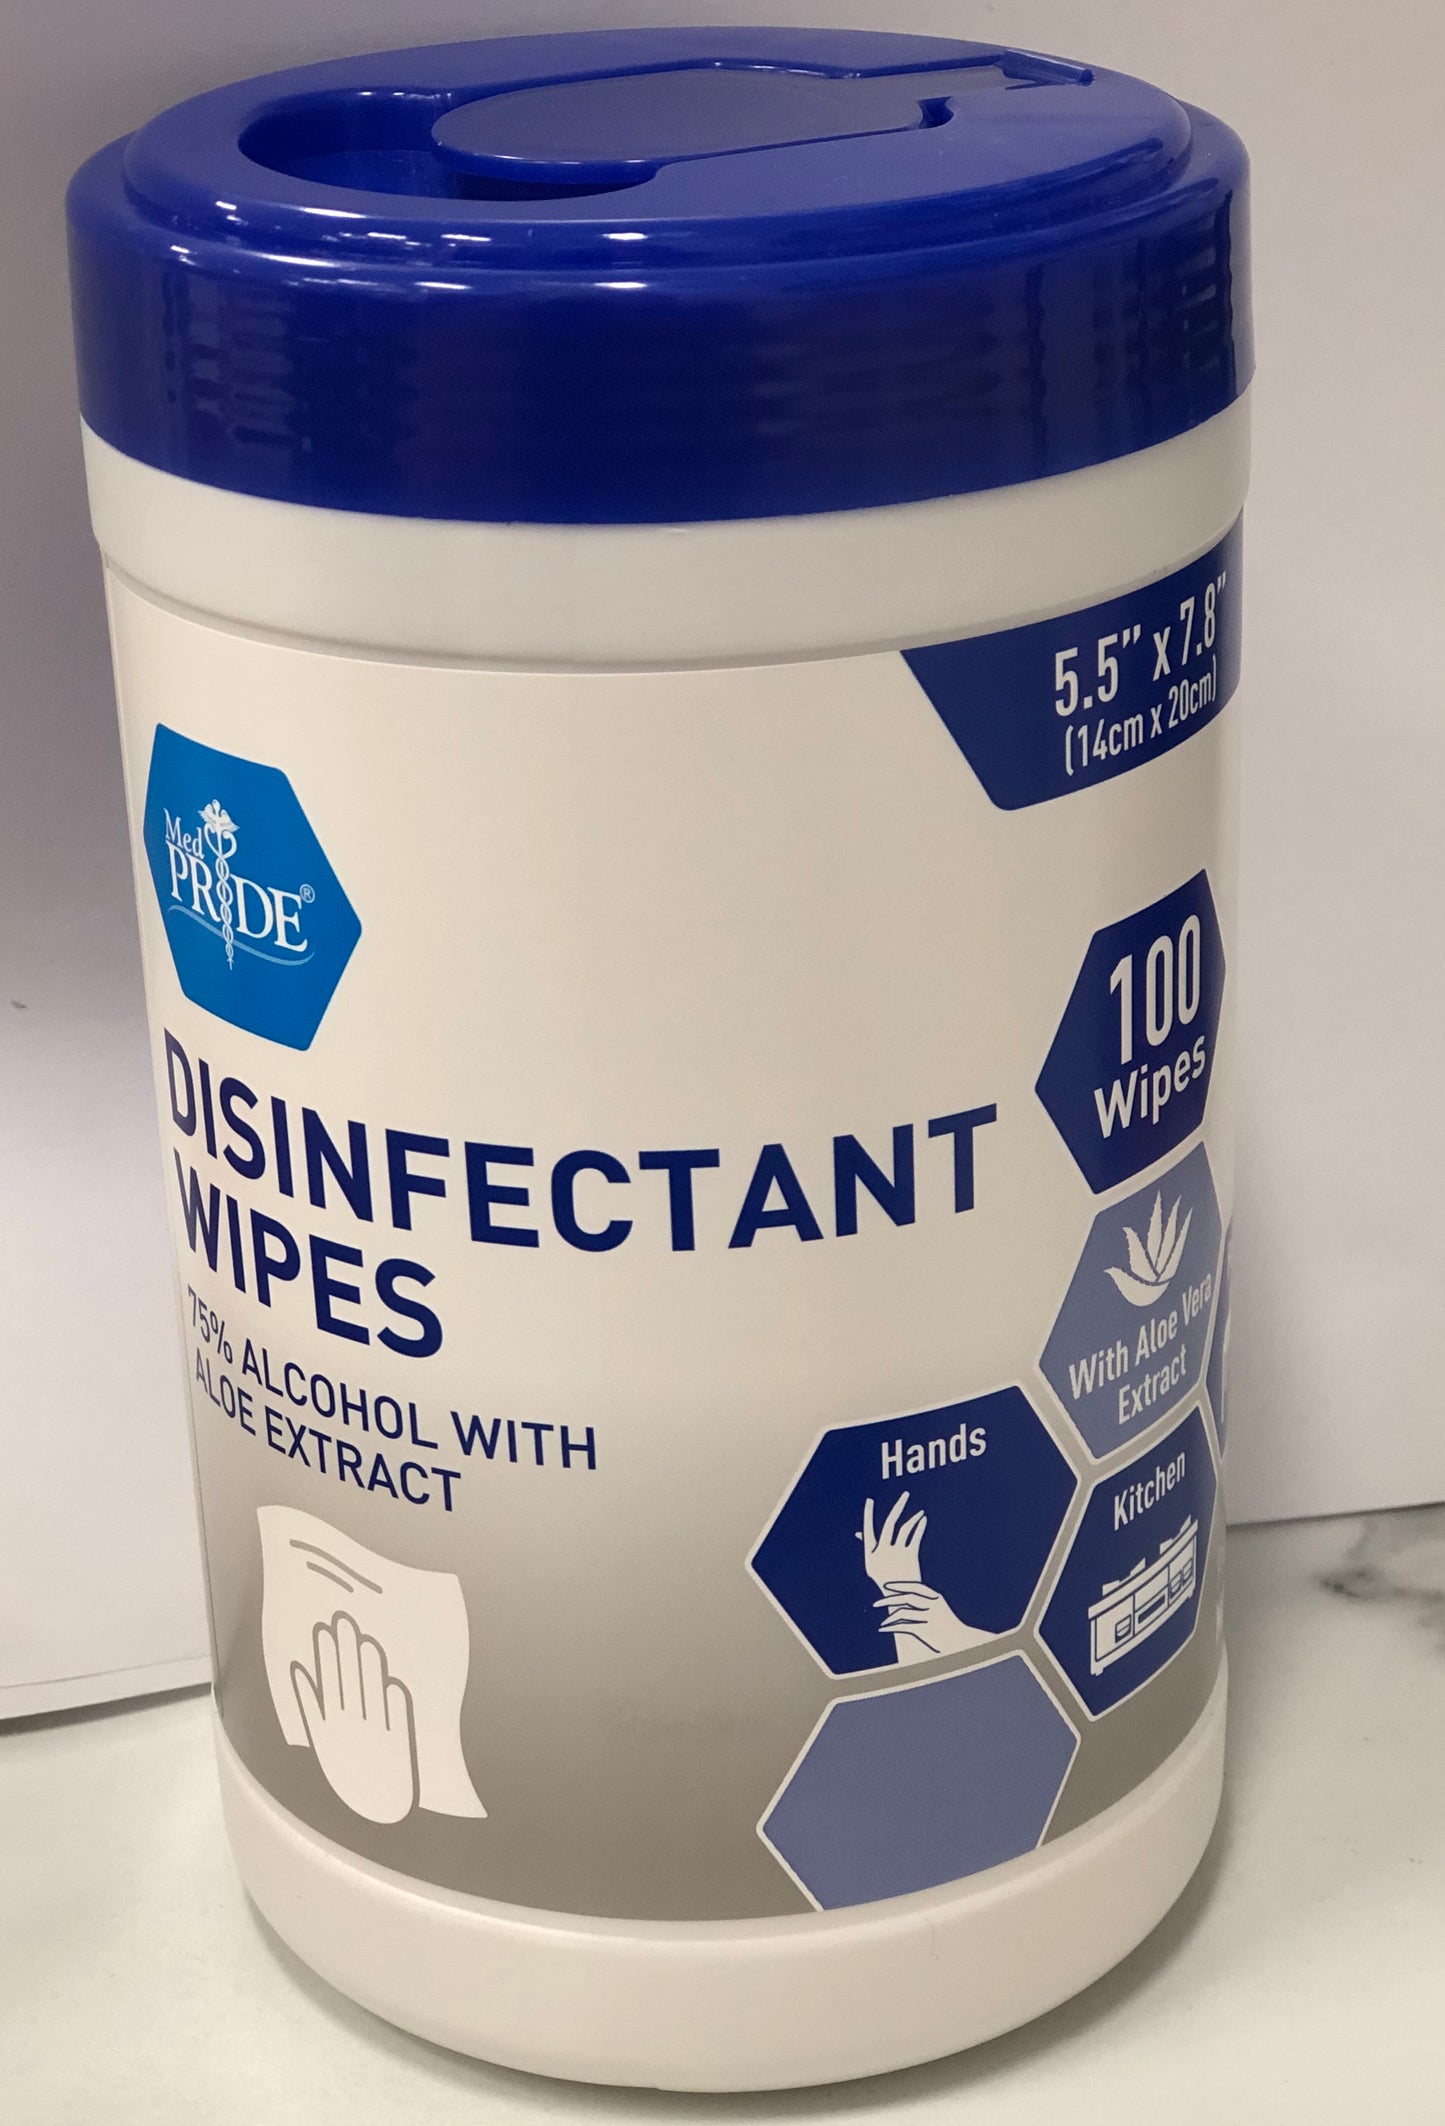 MEDPRIDE DISINFECTANT WIPES 75% alcohol with ALOE extract